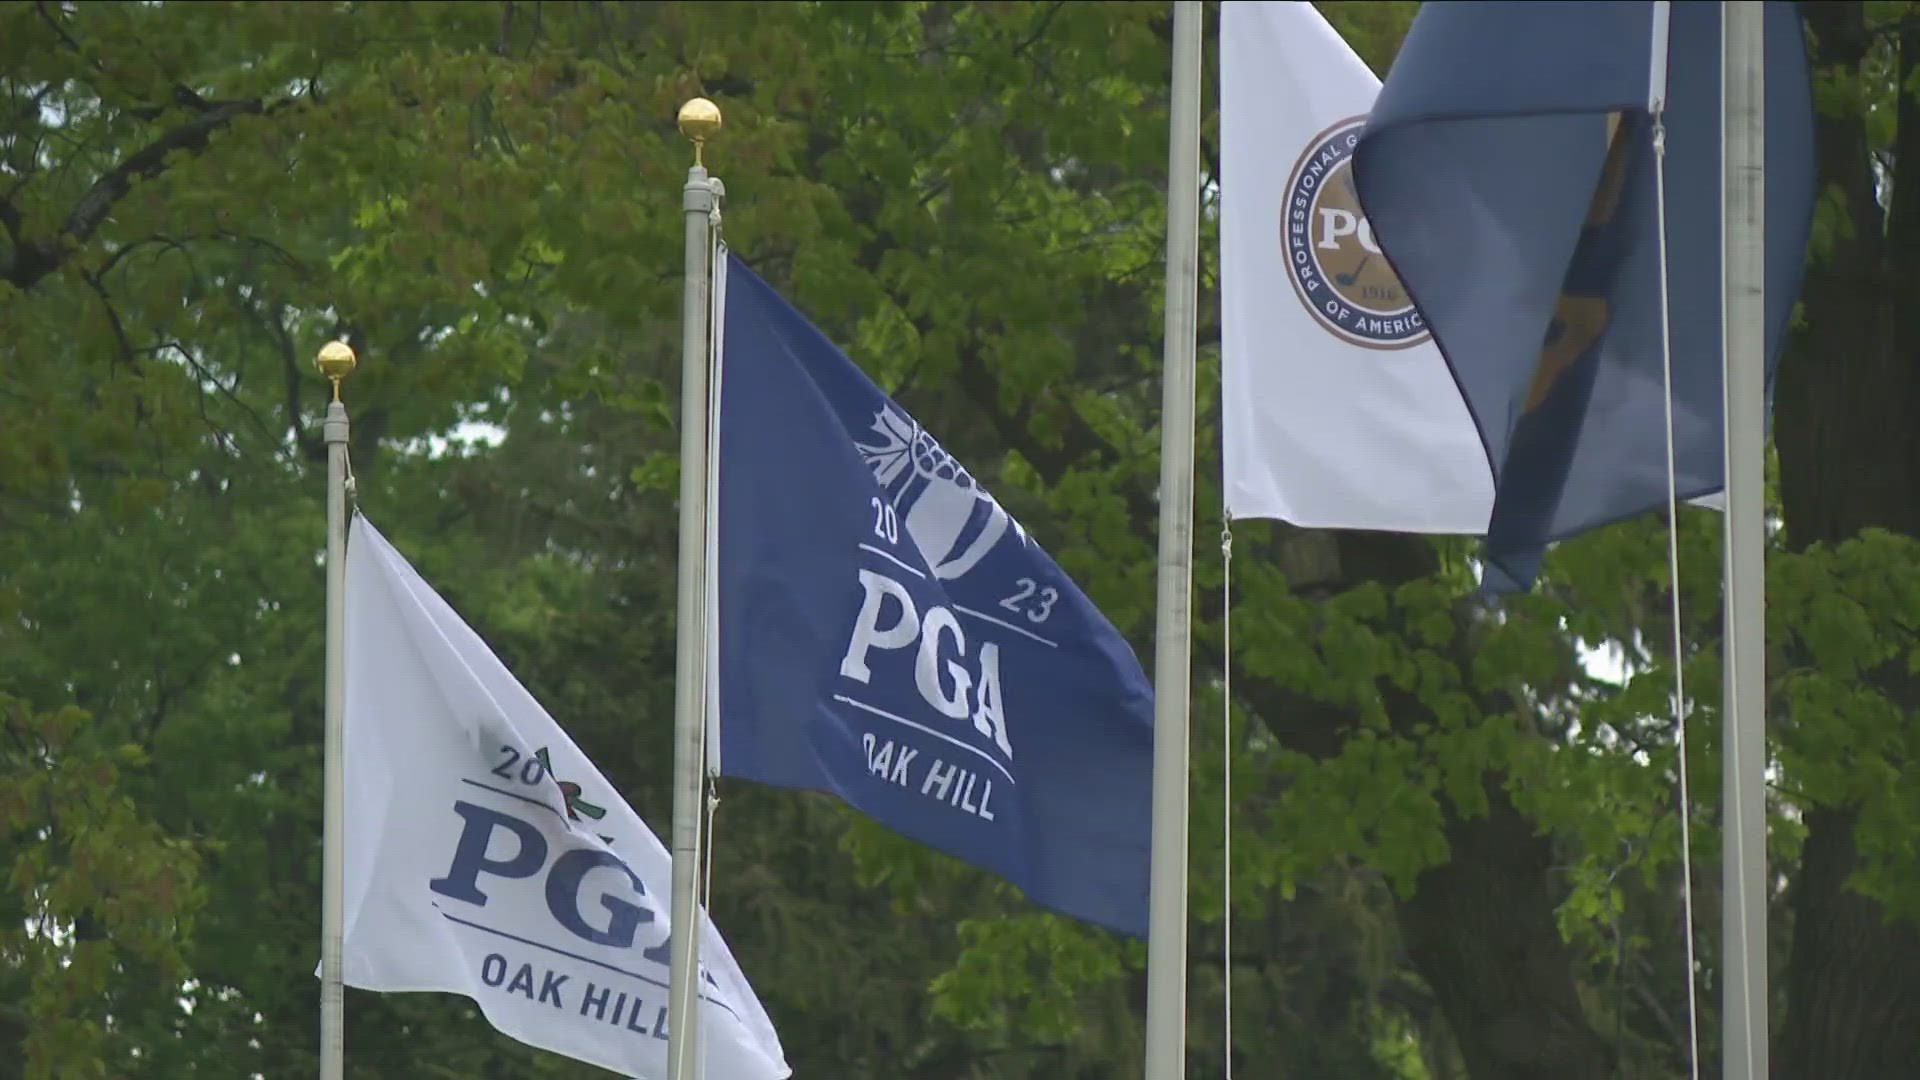 Weather plays big role at PGA championship